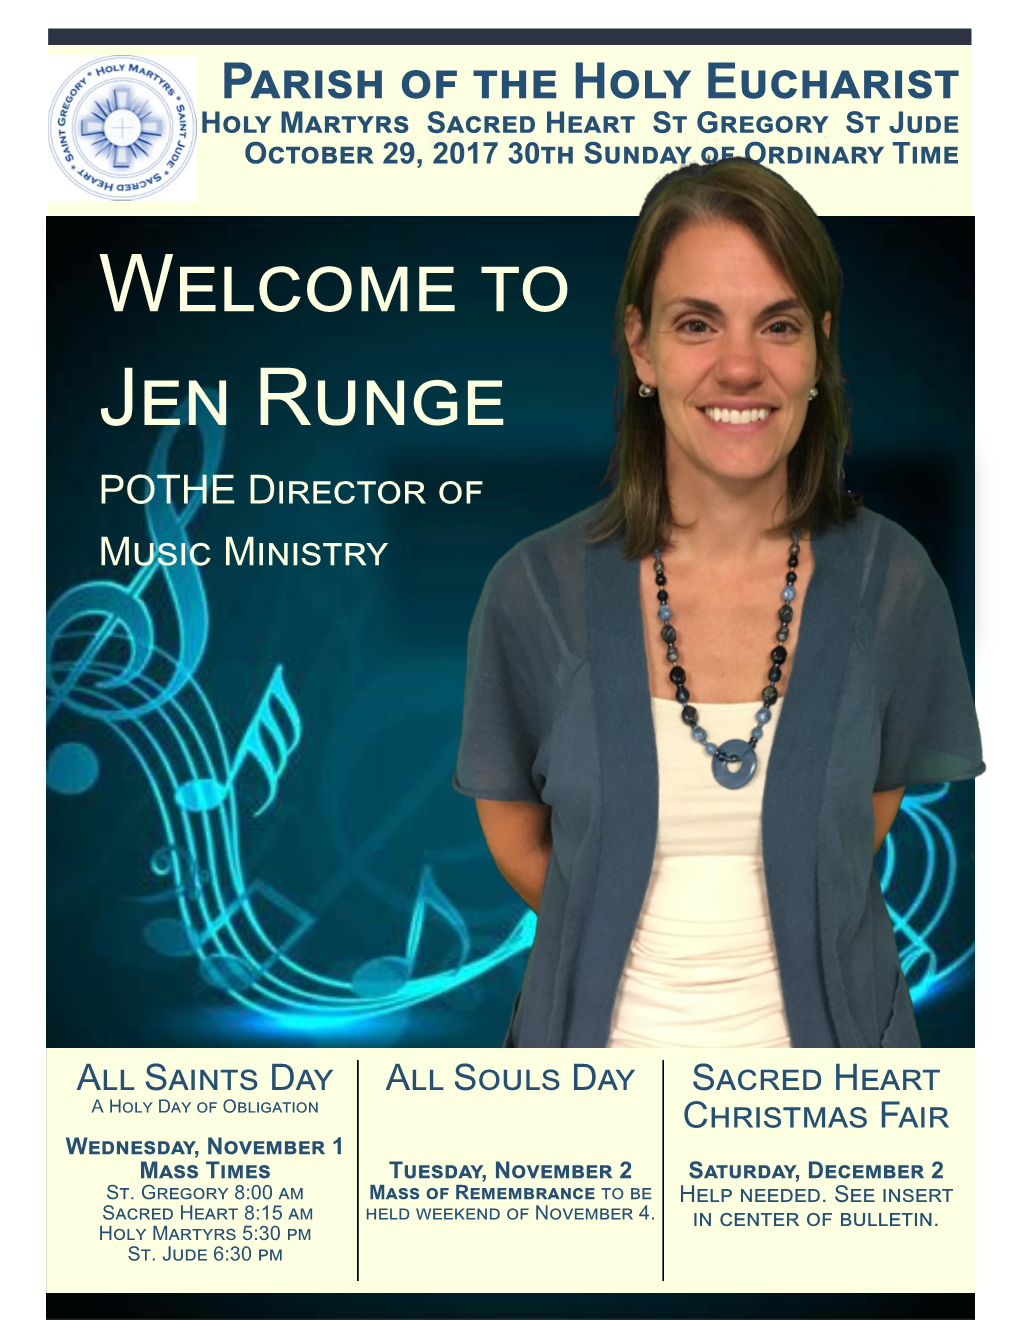 Welcome to Jen Runge POTHE Director of Music Ministry